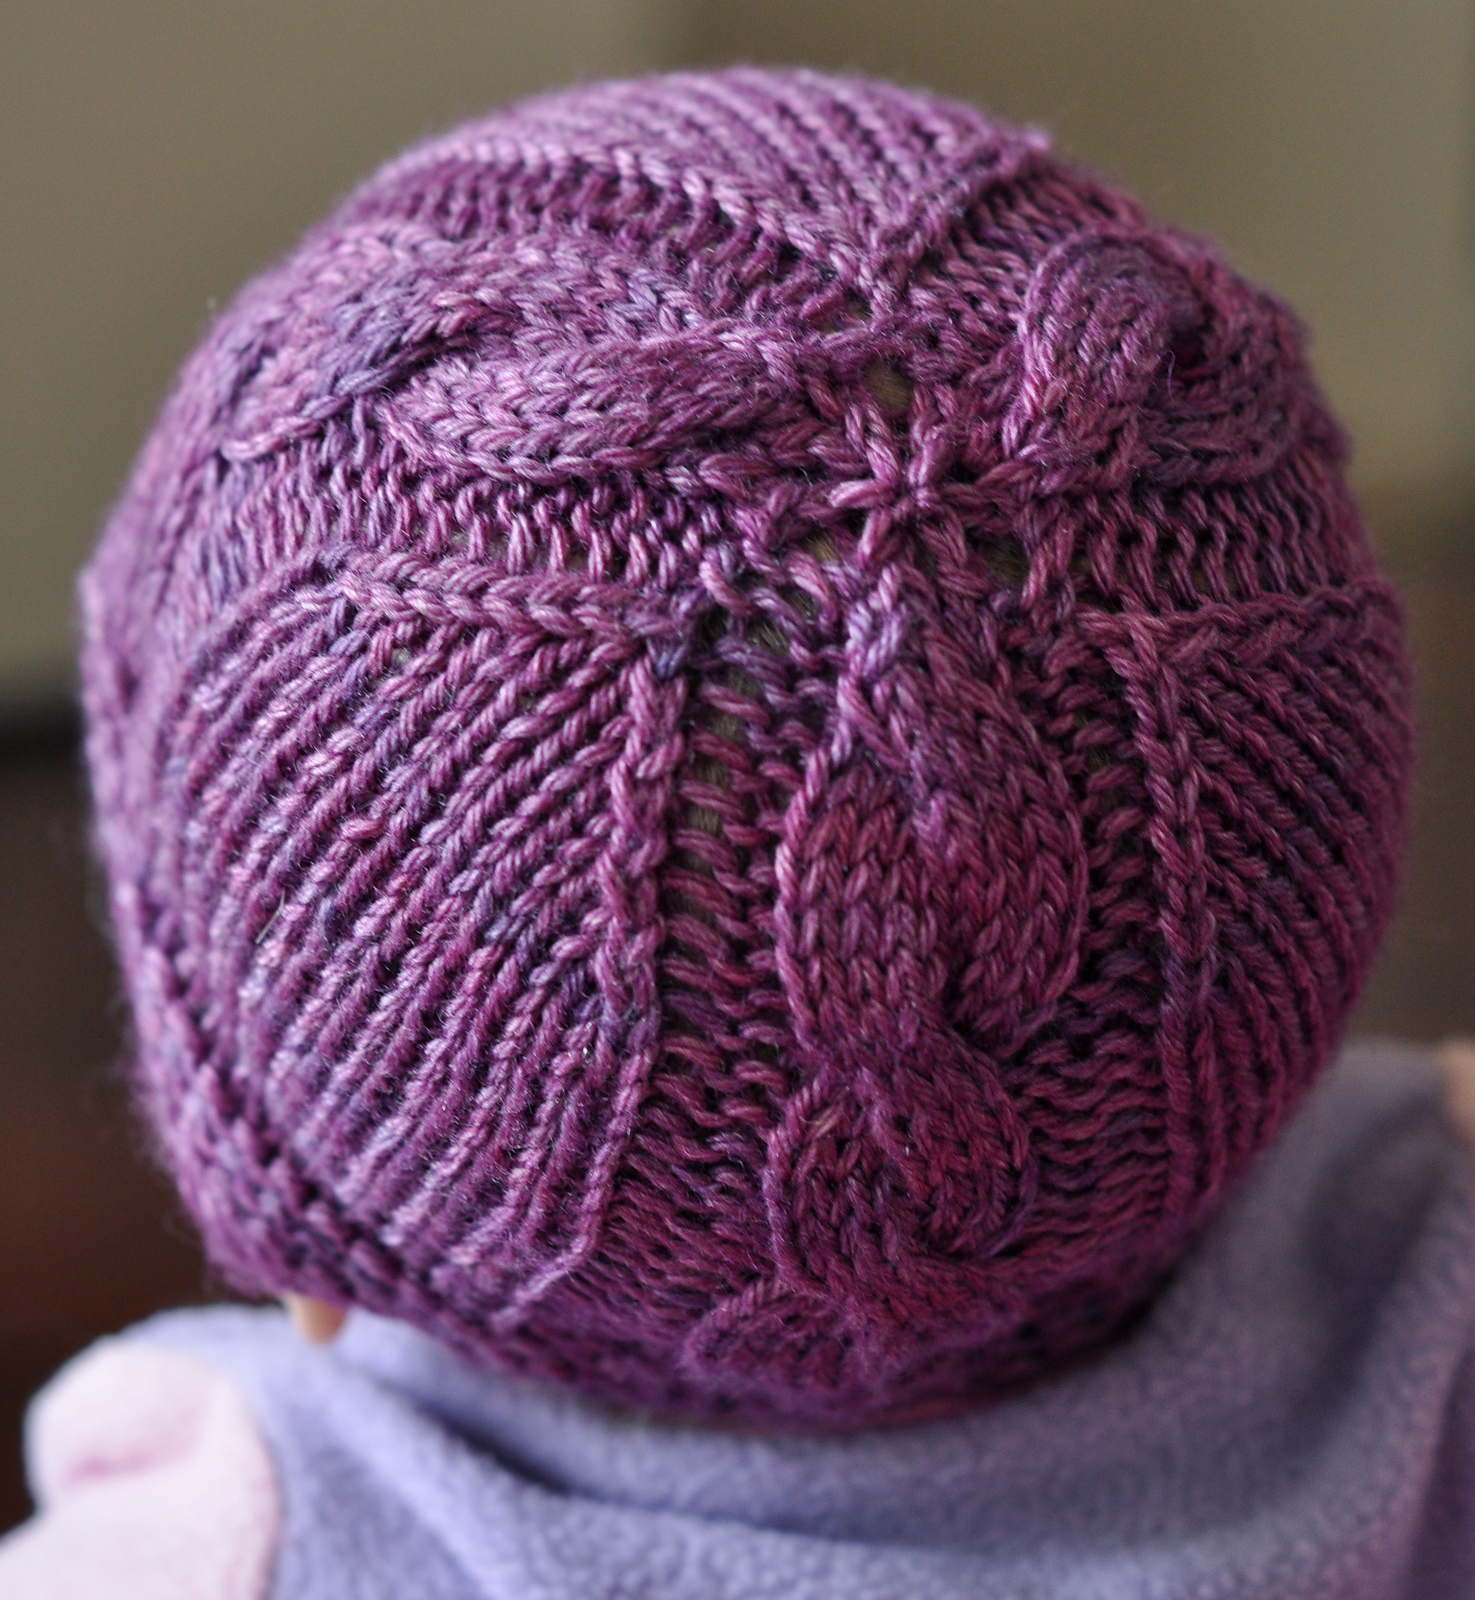 Baby Hat Knitting Patterns | In the Loop Knitting